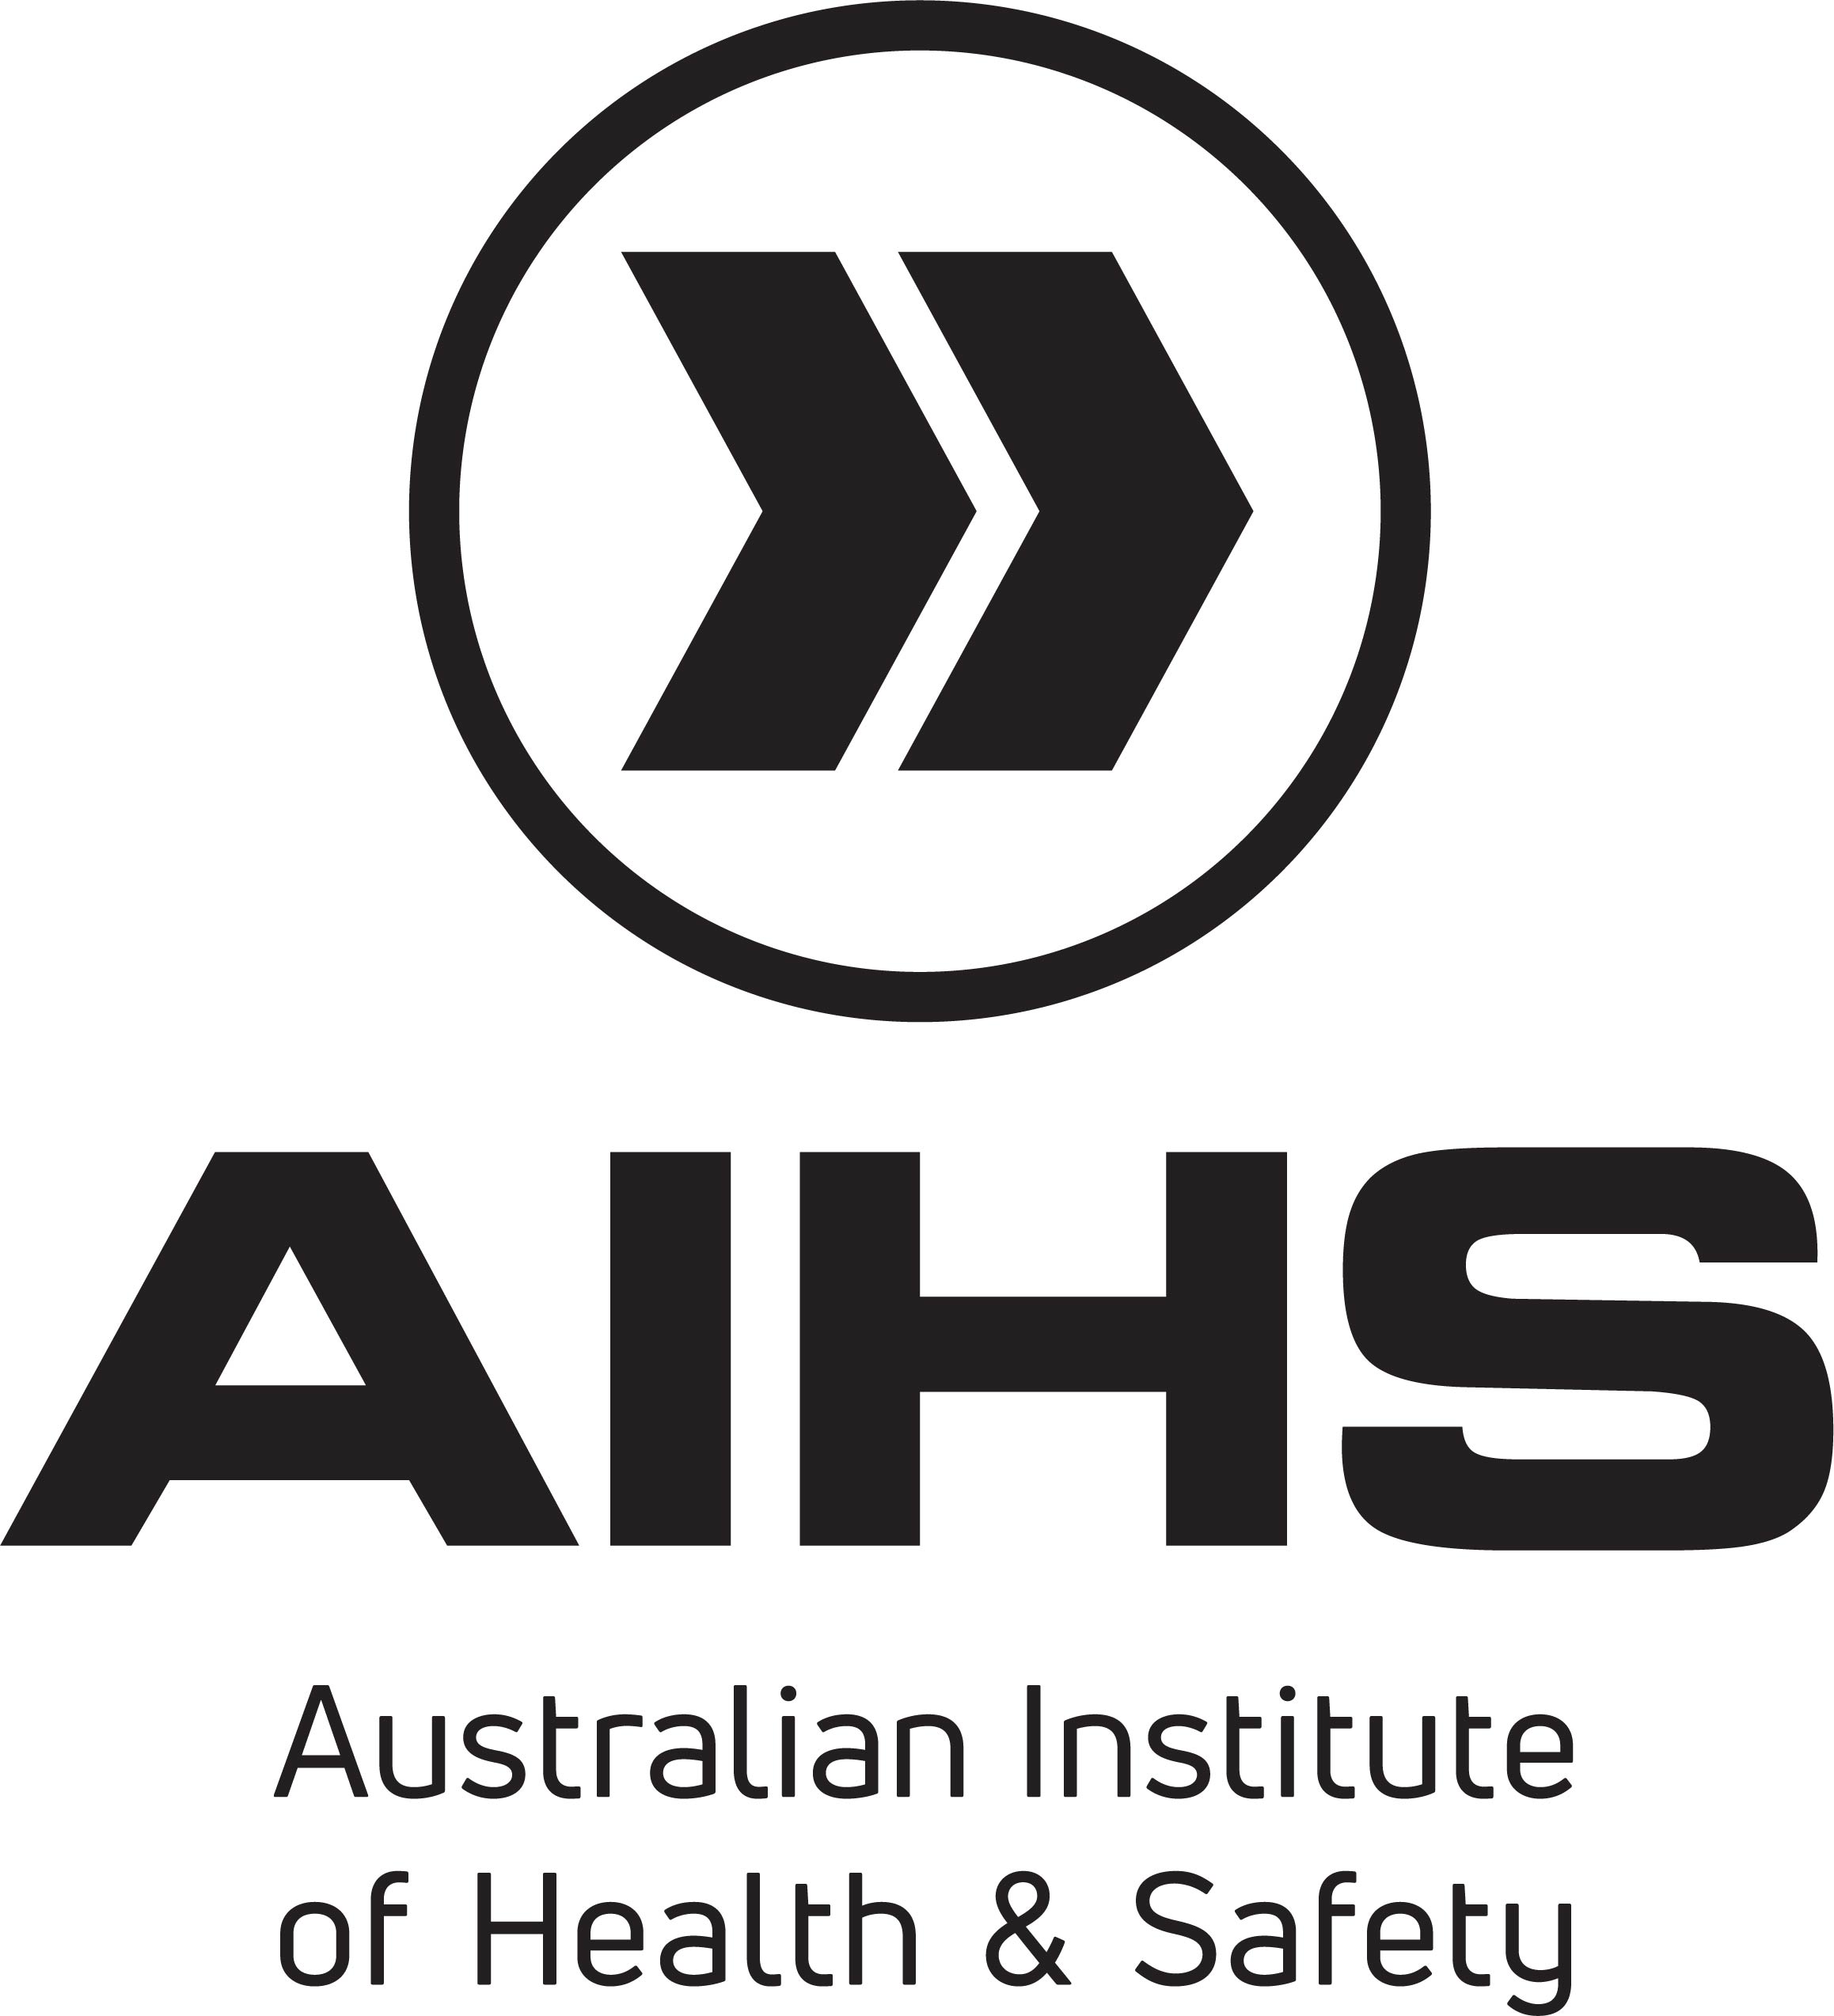 Australian Institute of Health and Safety